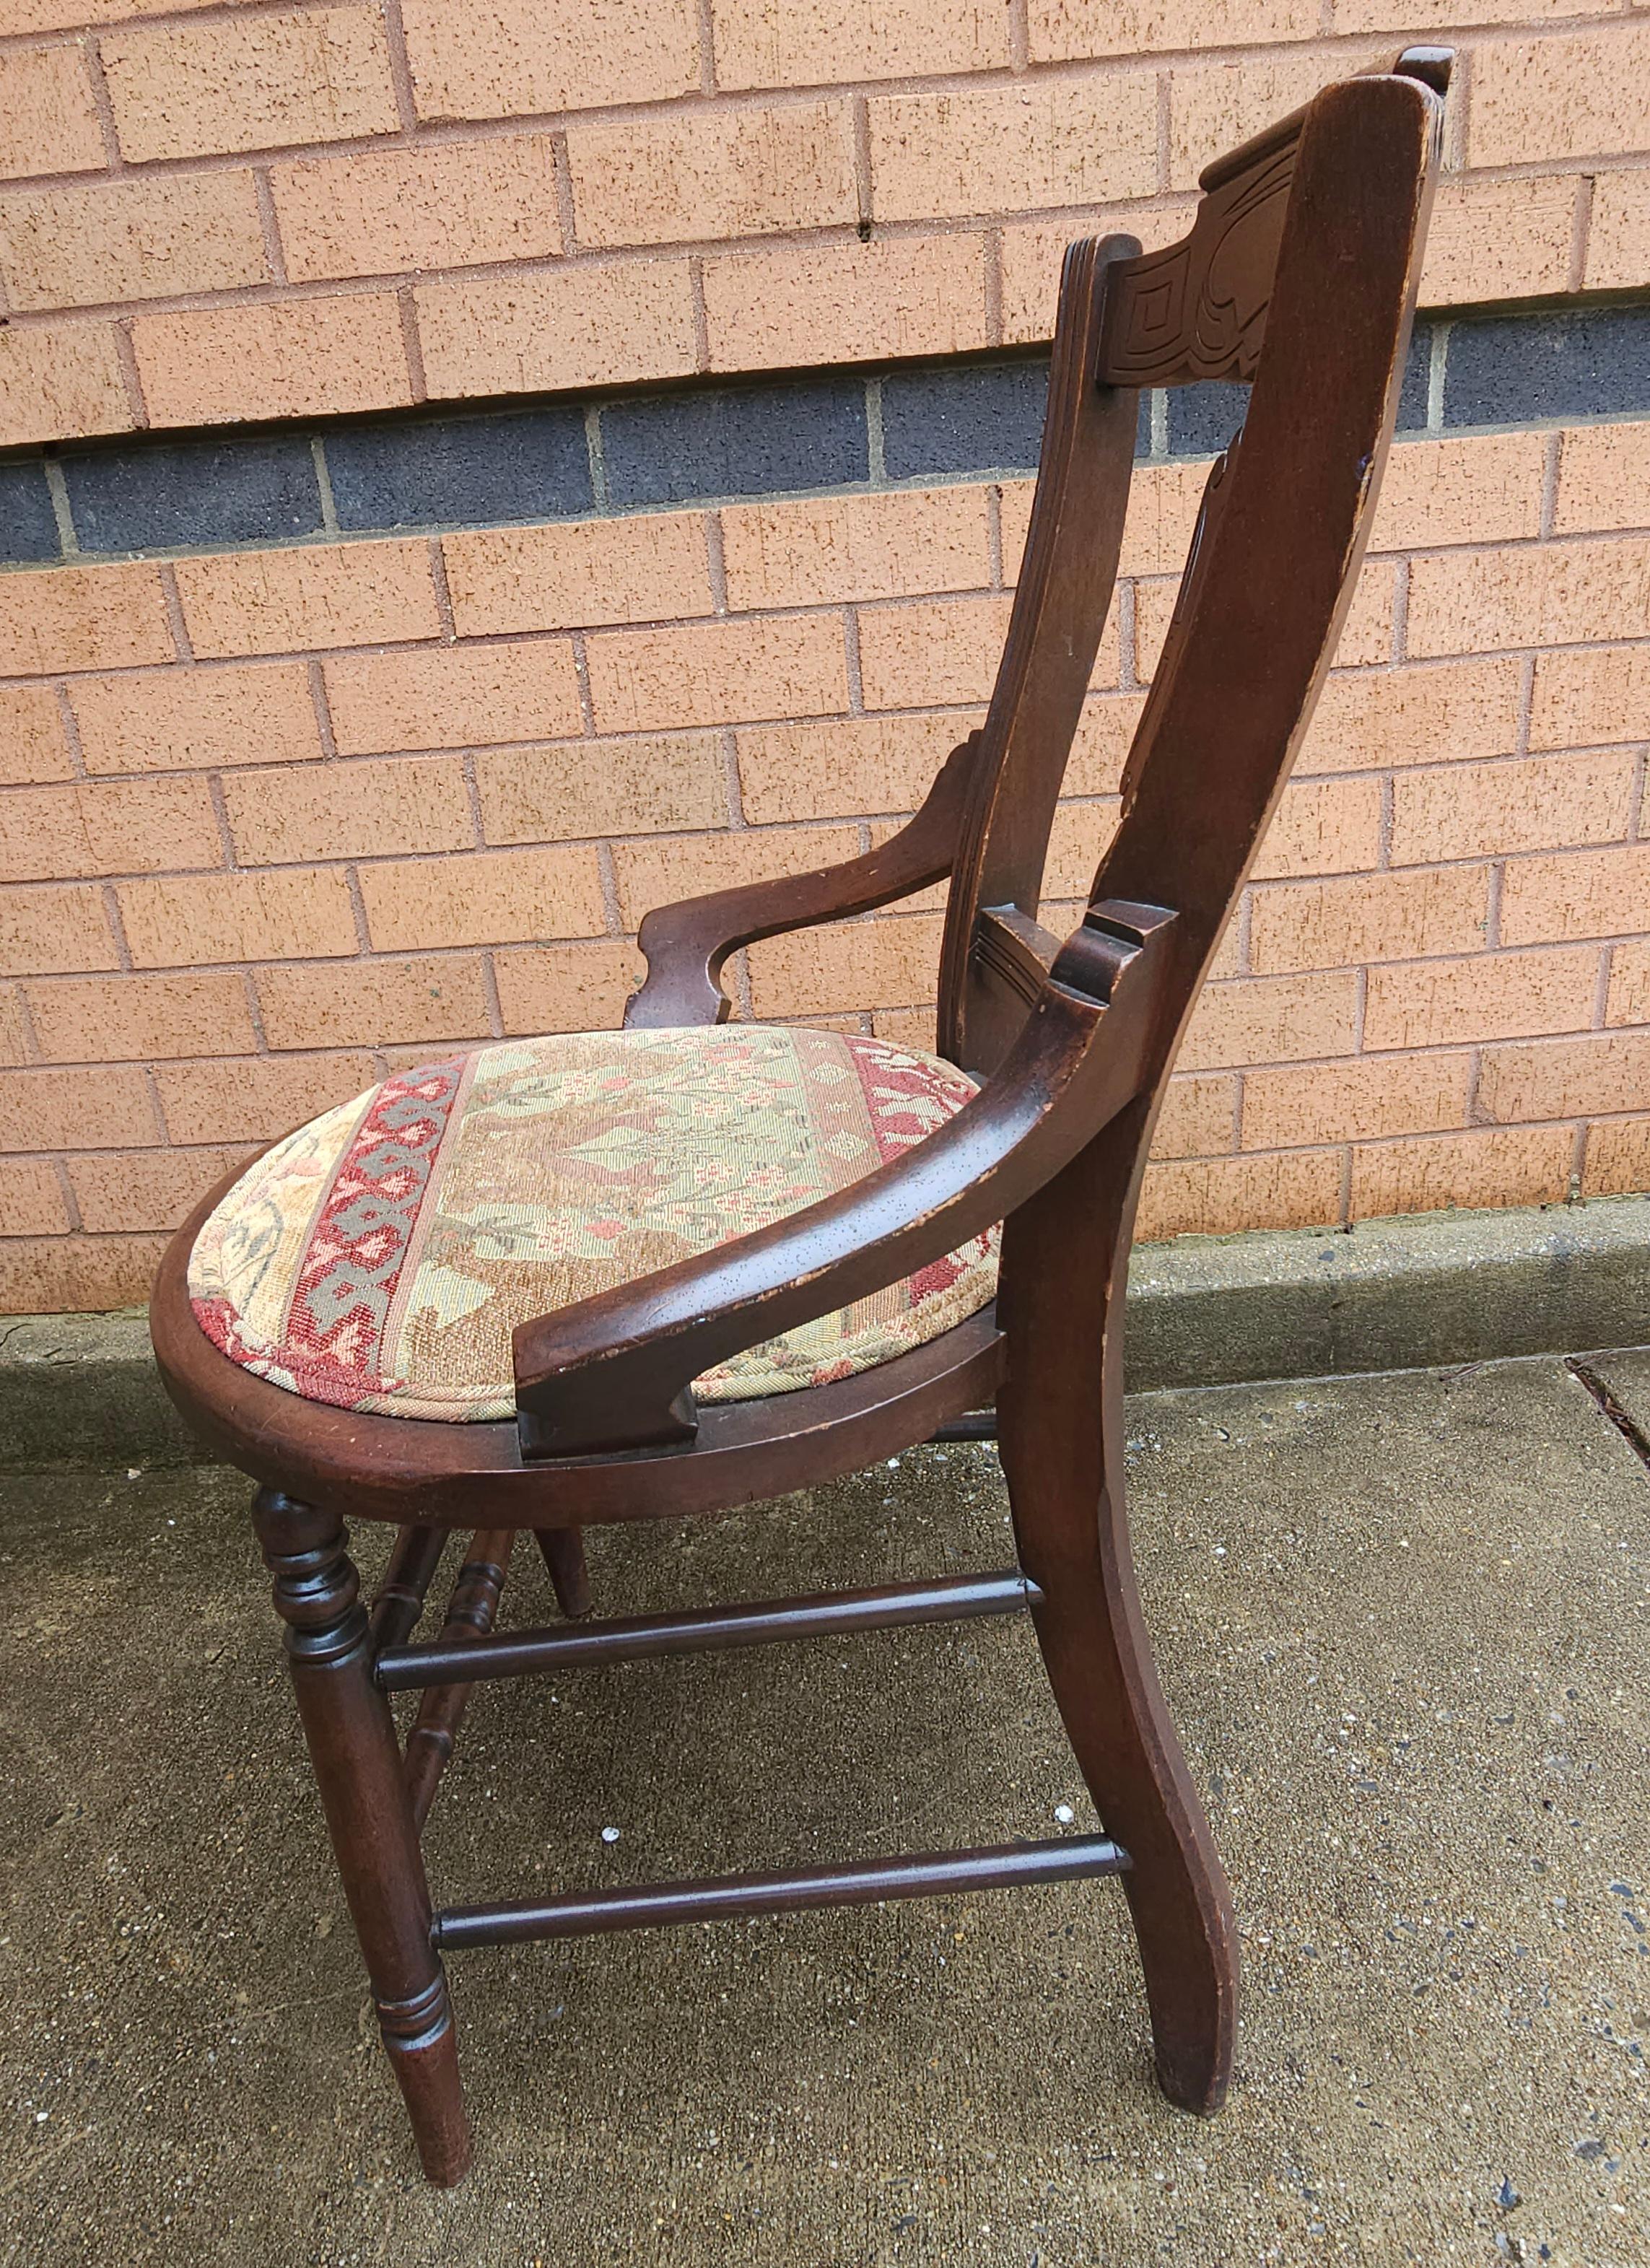 Late 19th Century Victorian Walnut and Tapestry Upholstered Seat Side Chair in great antique condition. Measures 21